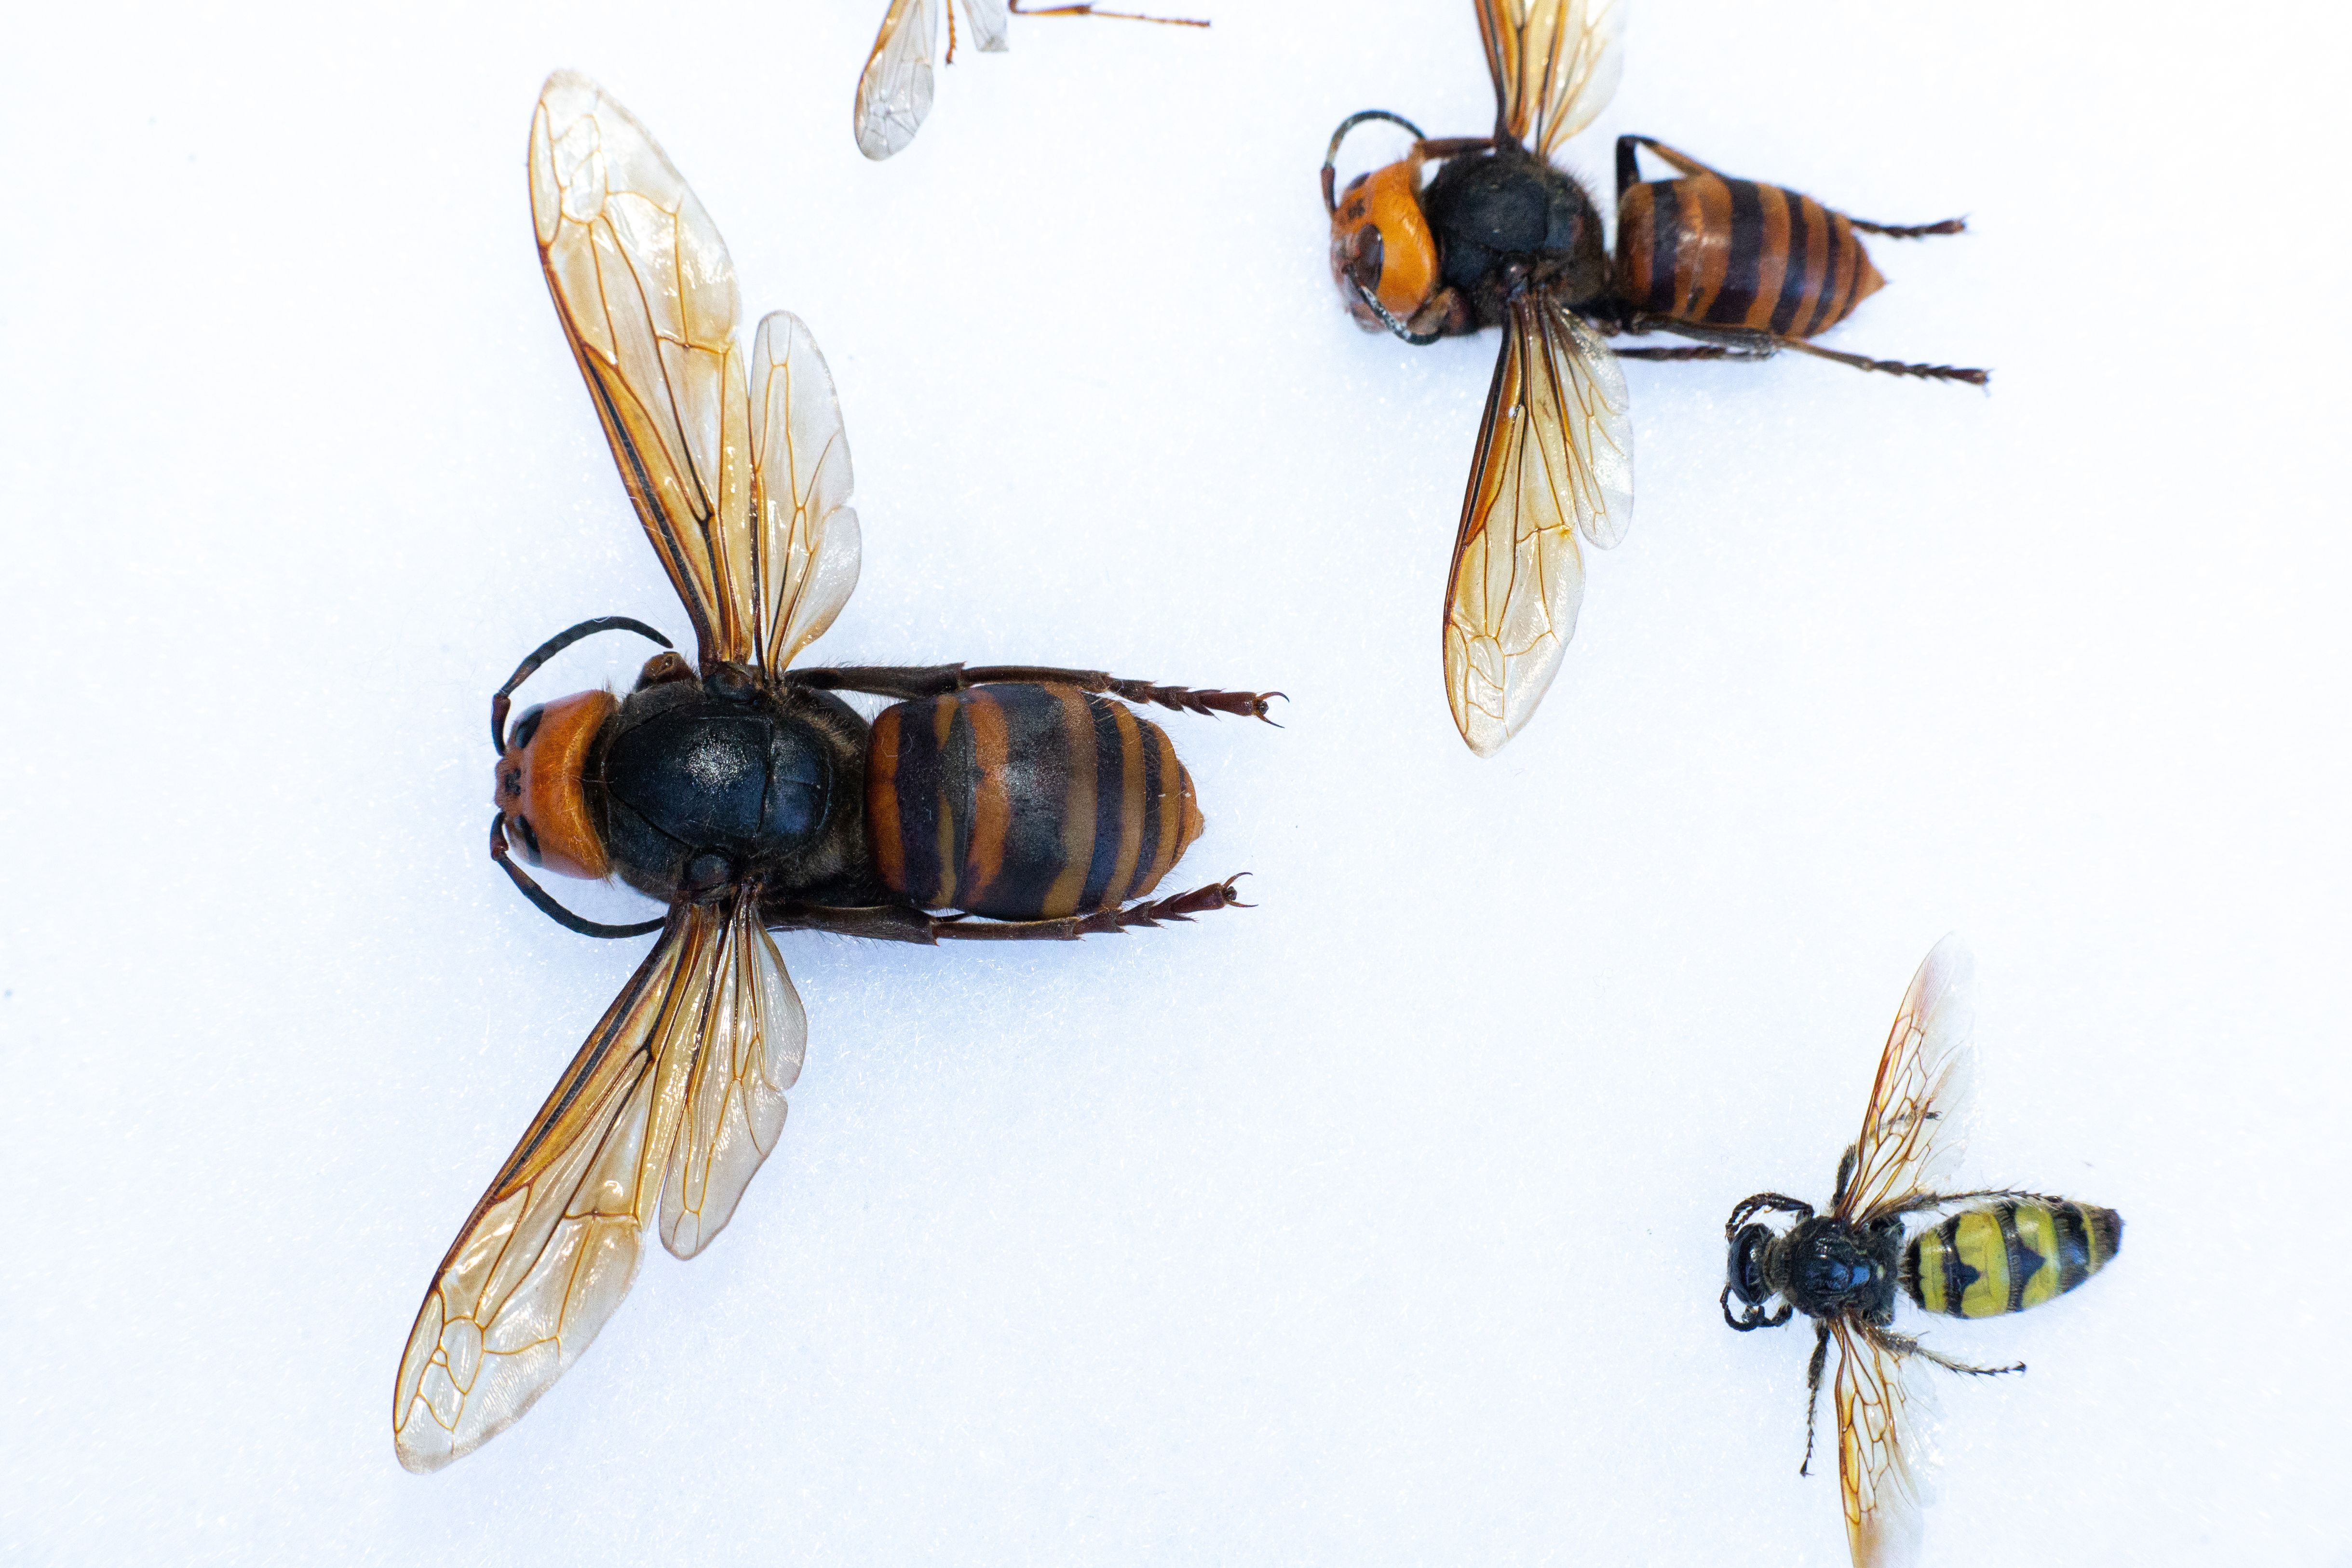 Three hornets, with the upper two being giant northern hornets, are shown. The giant northern hornets are much larger than the other hornet.